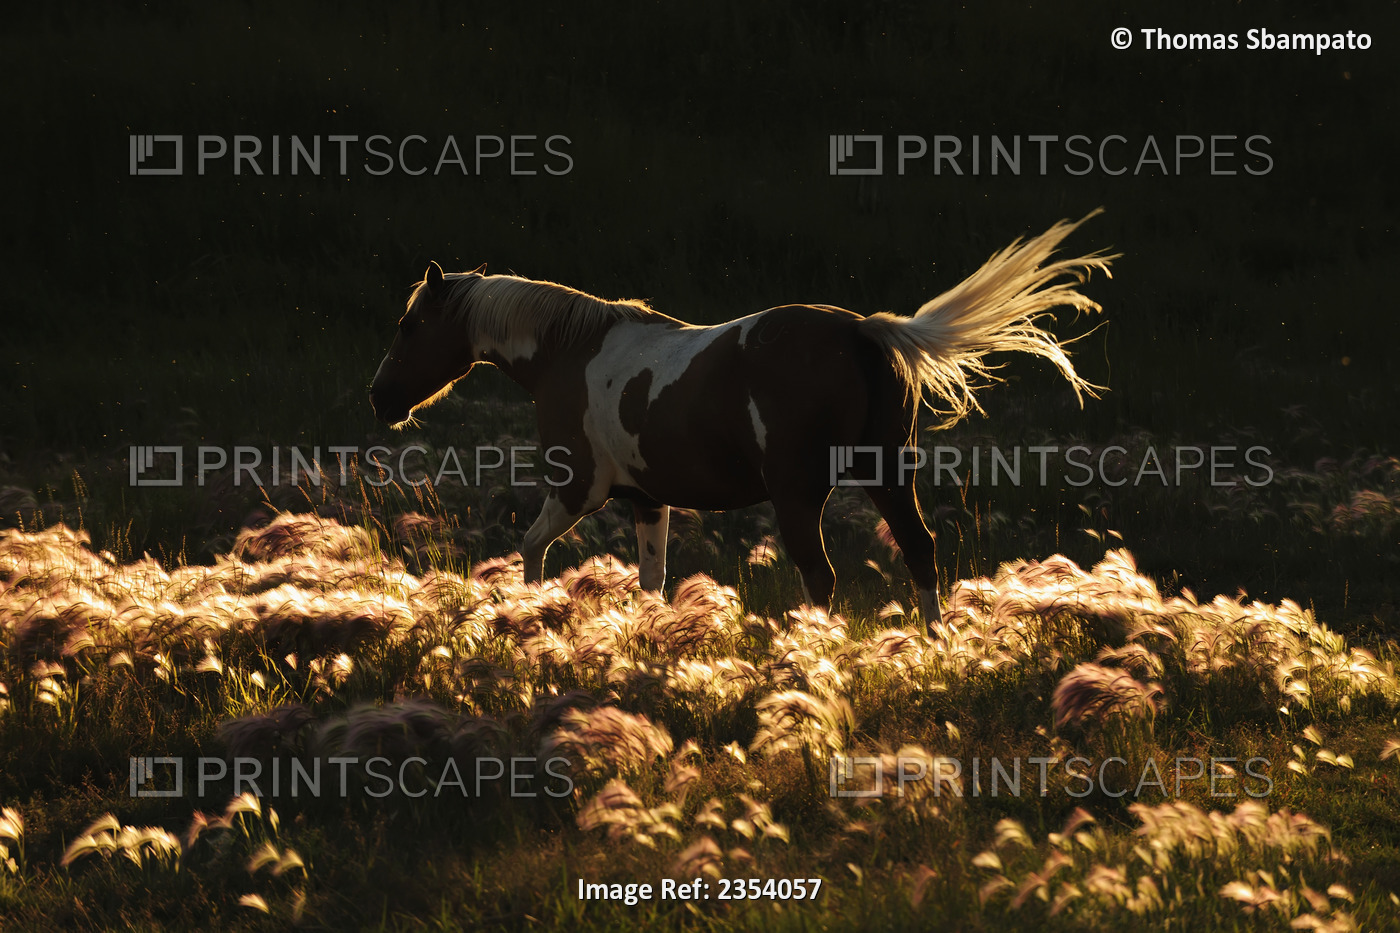 A Mustang Horse Walks Through The Foxtail Grass (Alopecurus) That Shines In The ...